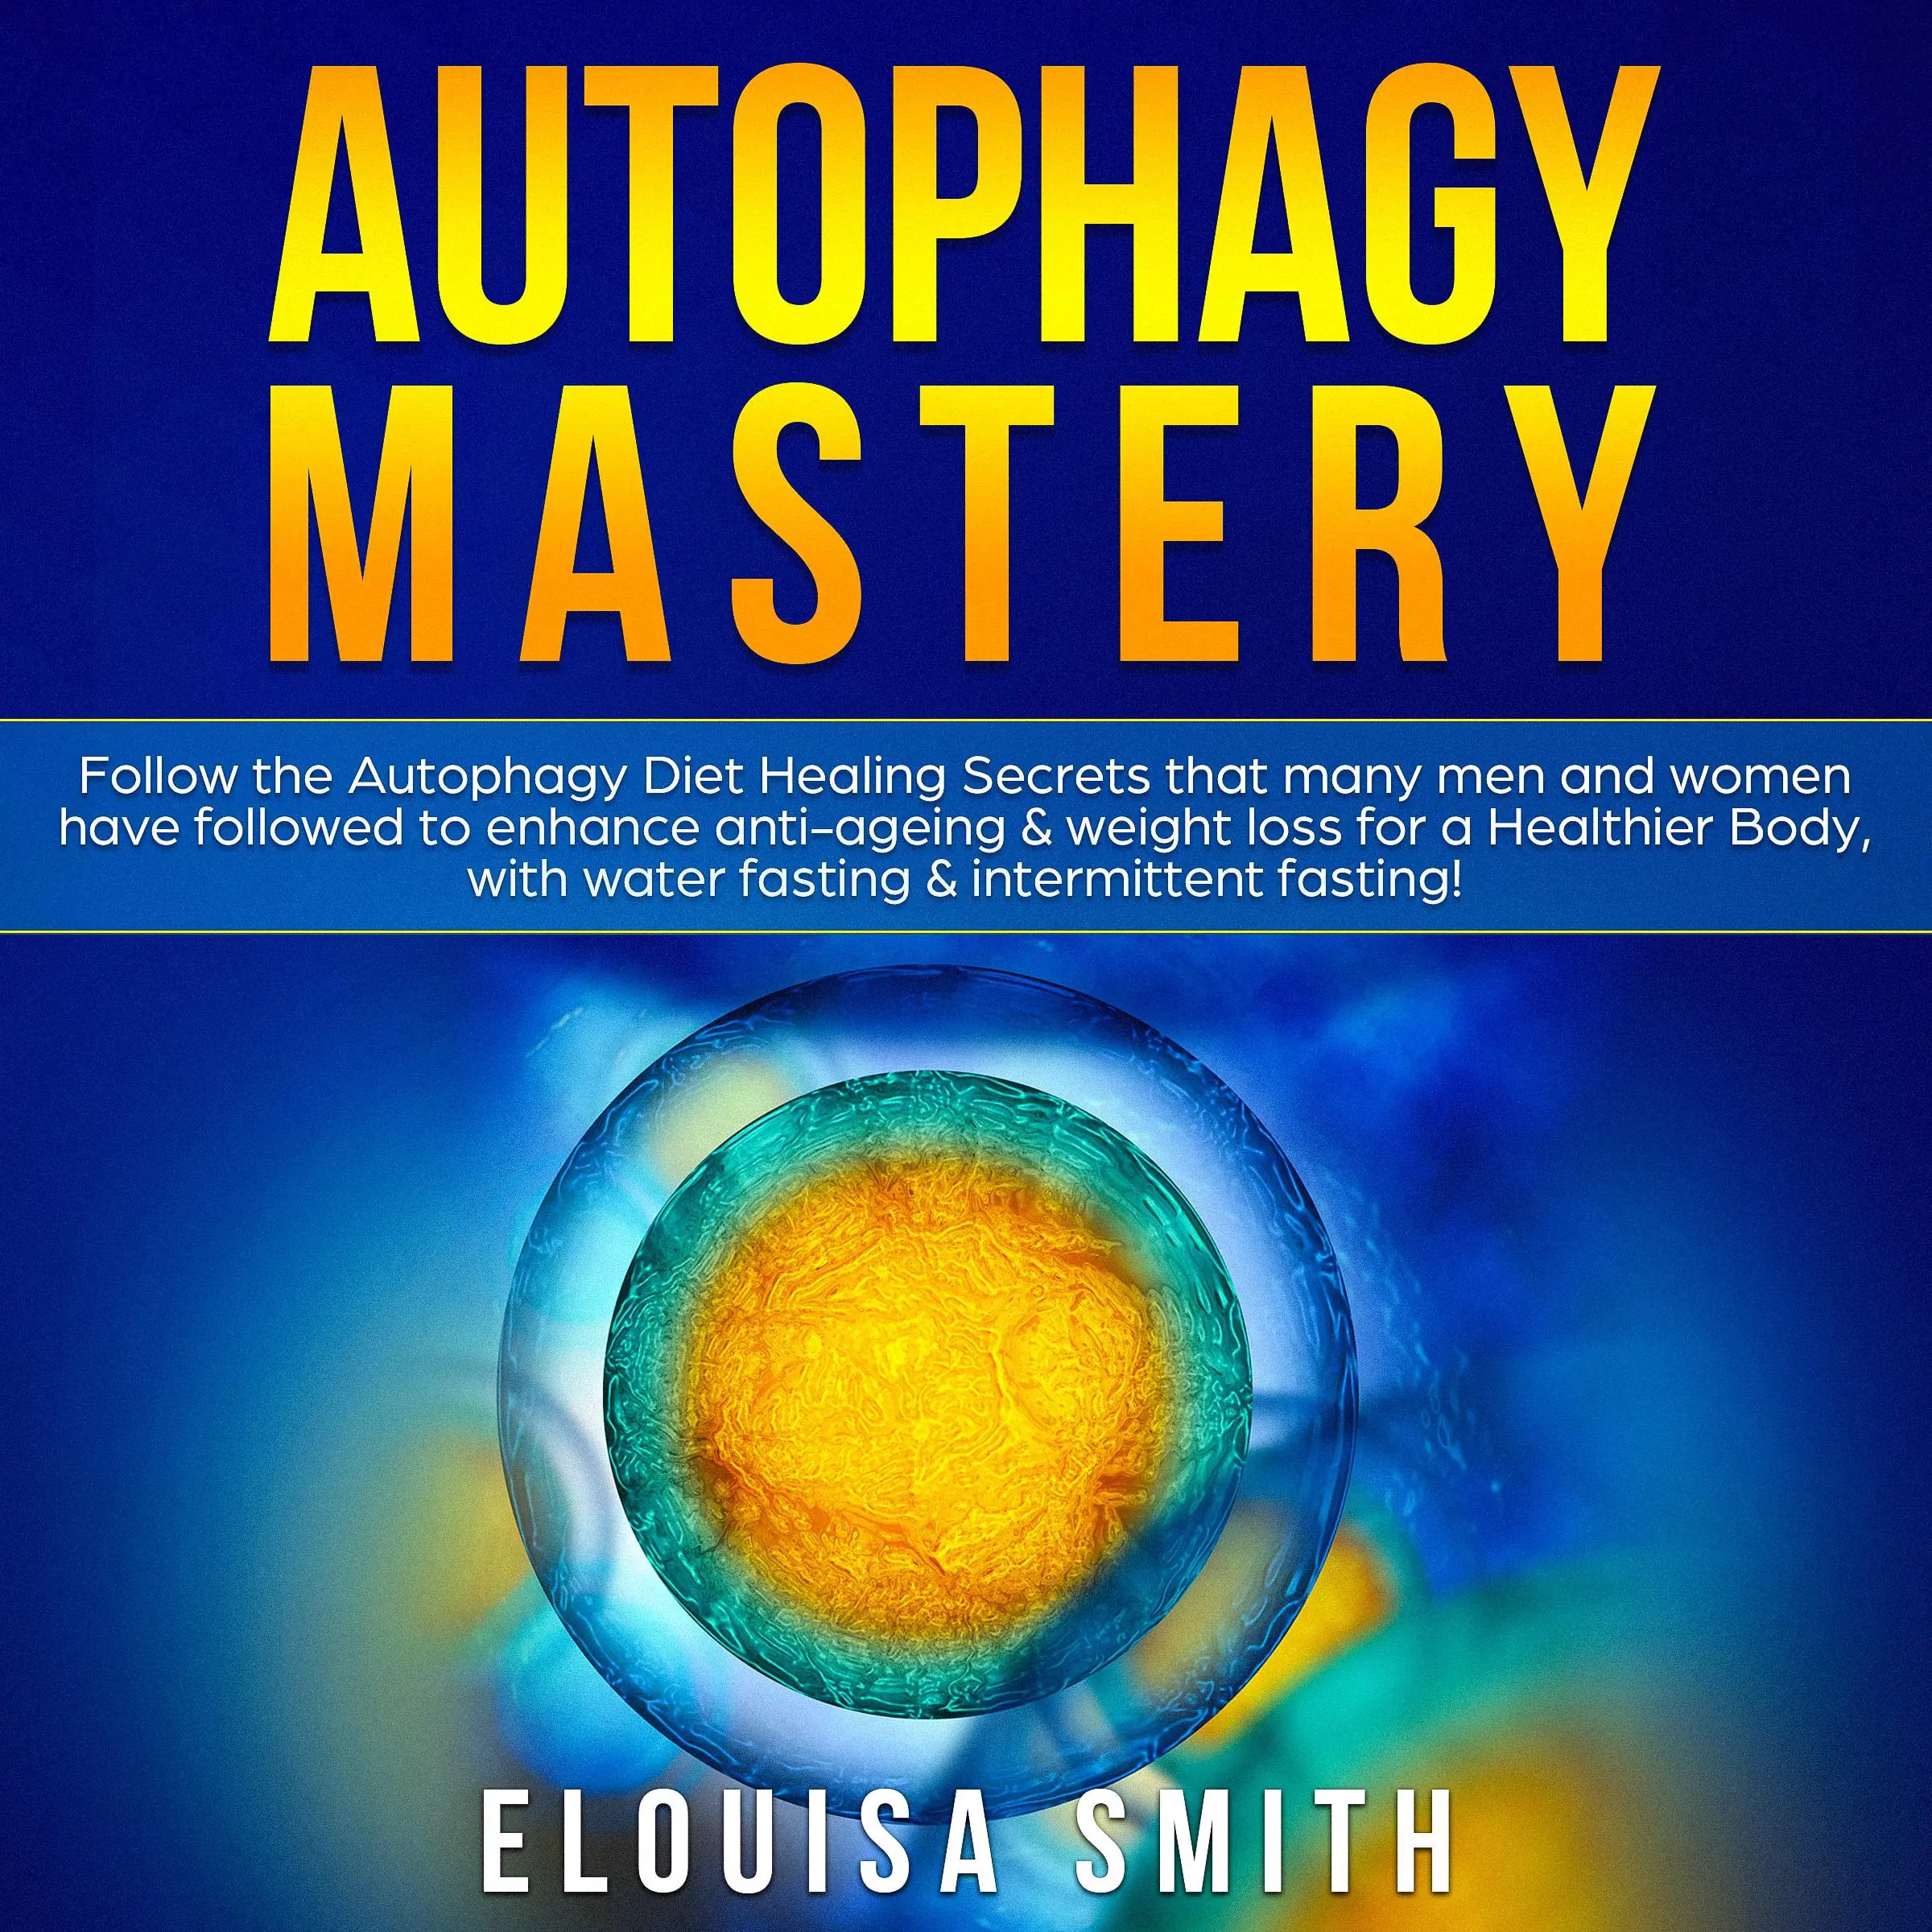 Autophagy Mastery Audiobook by Elouisa Smith